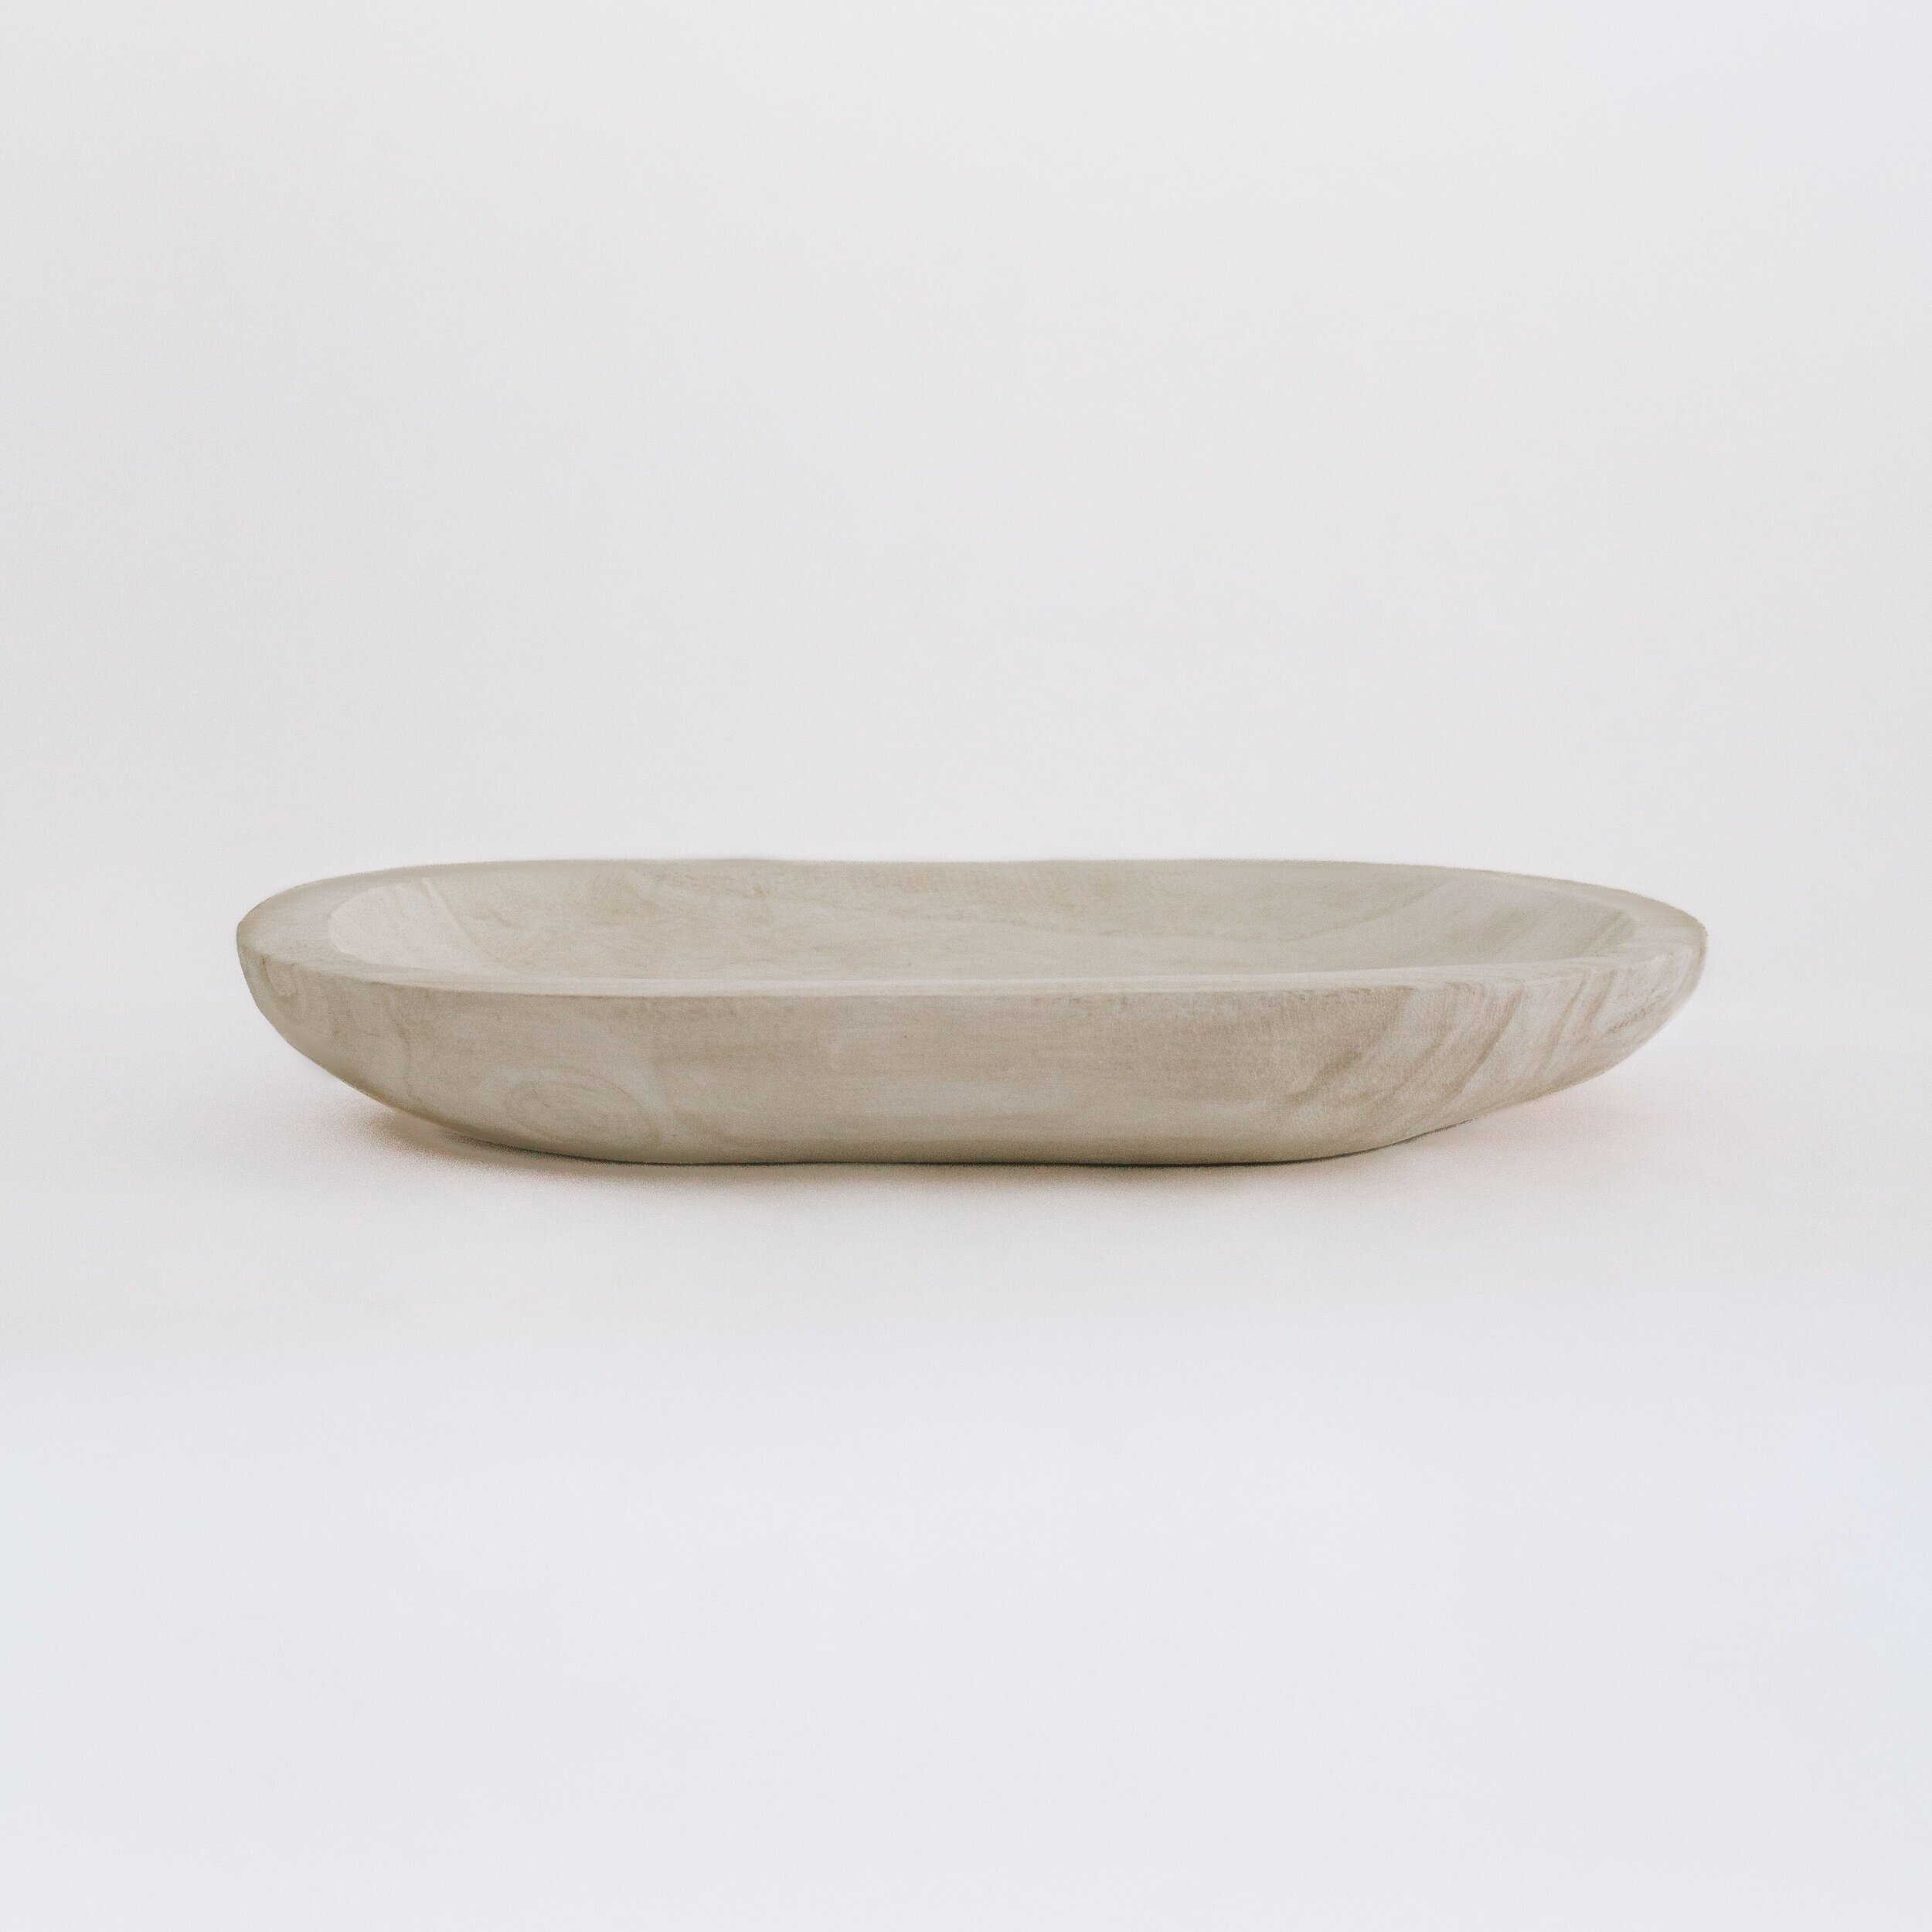 10 interior design styles, people, products, and trends I'm crushing on right now - whitewashed wood bowl by Nadine Stay. Home decor decorative staple.